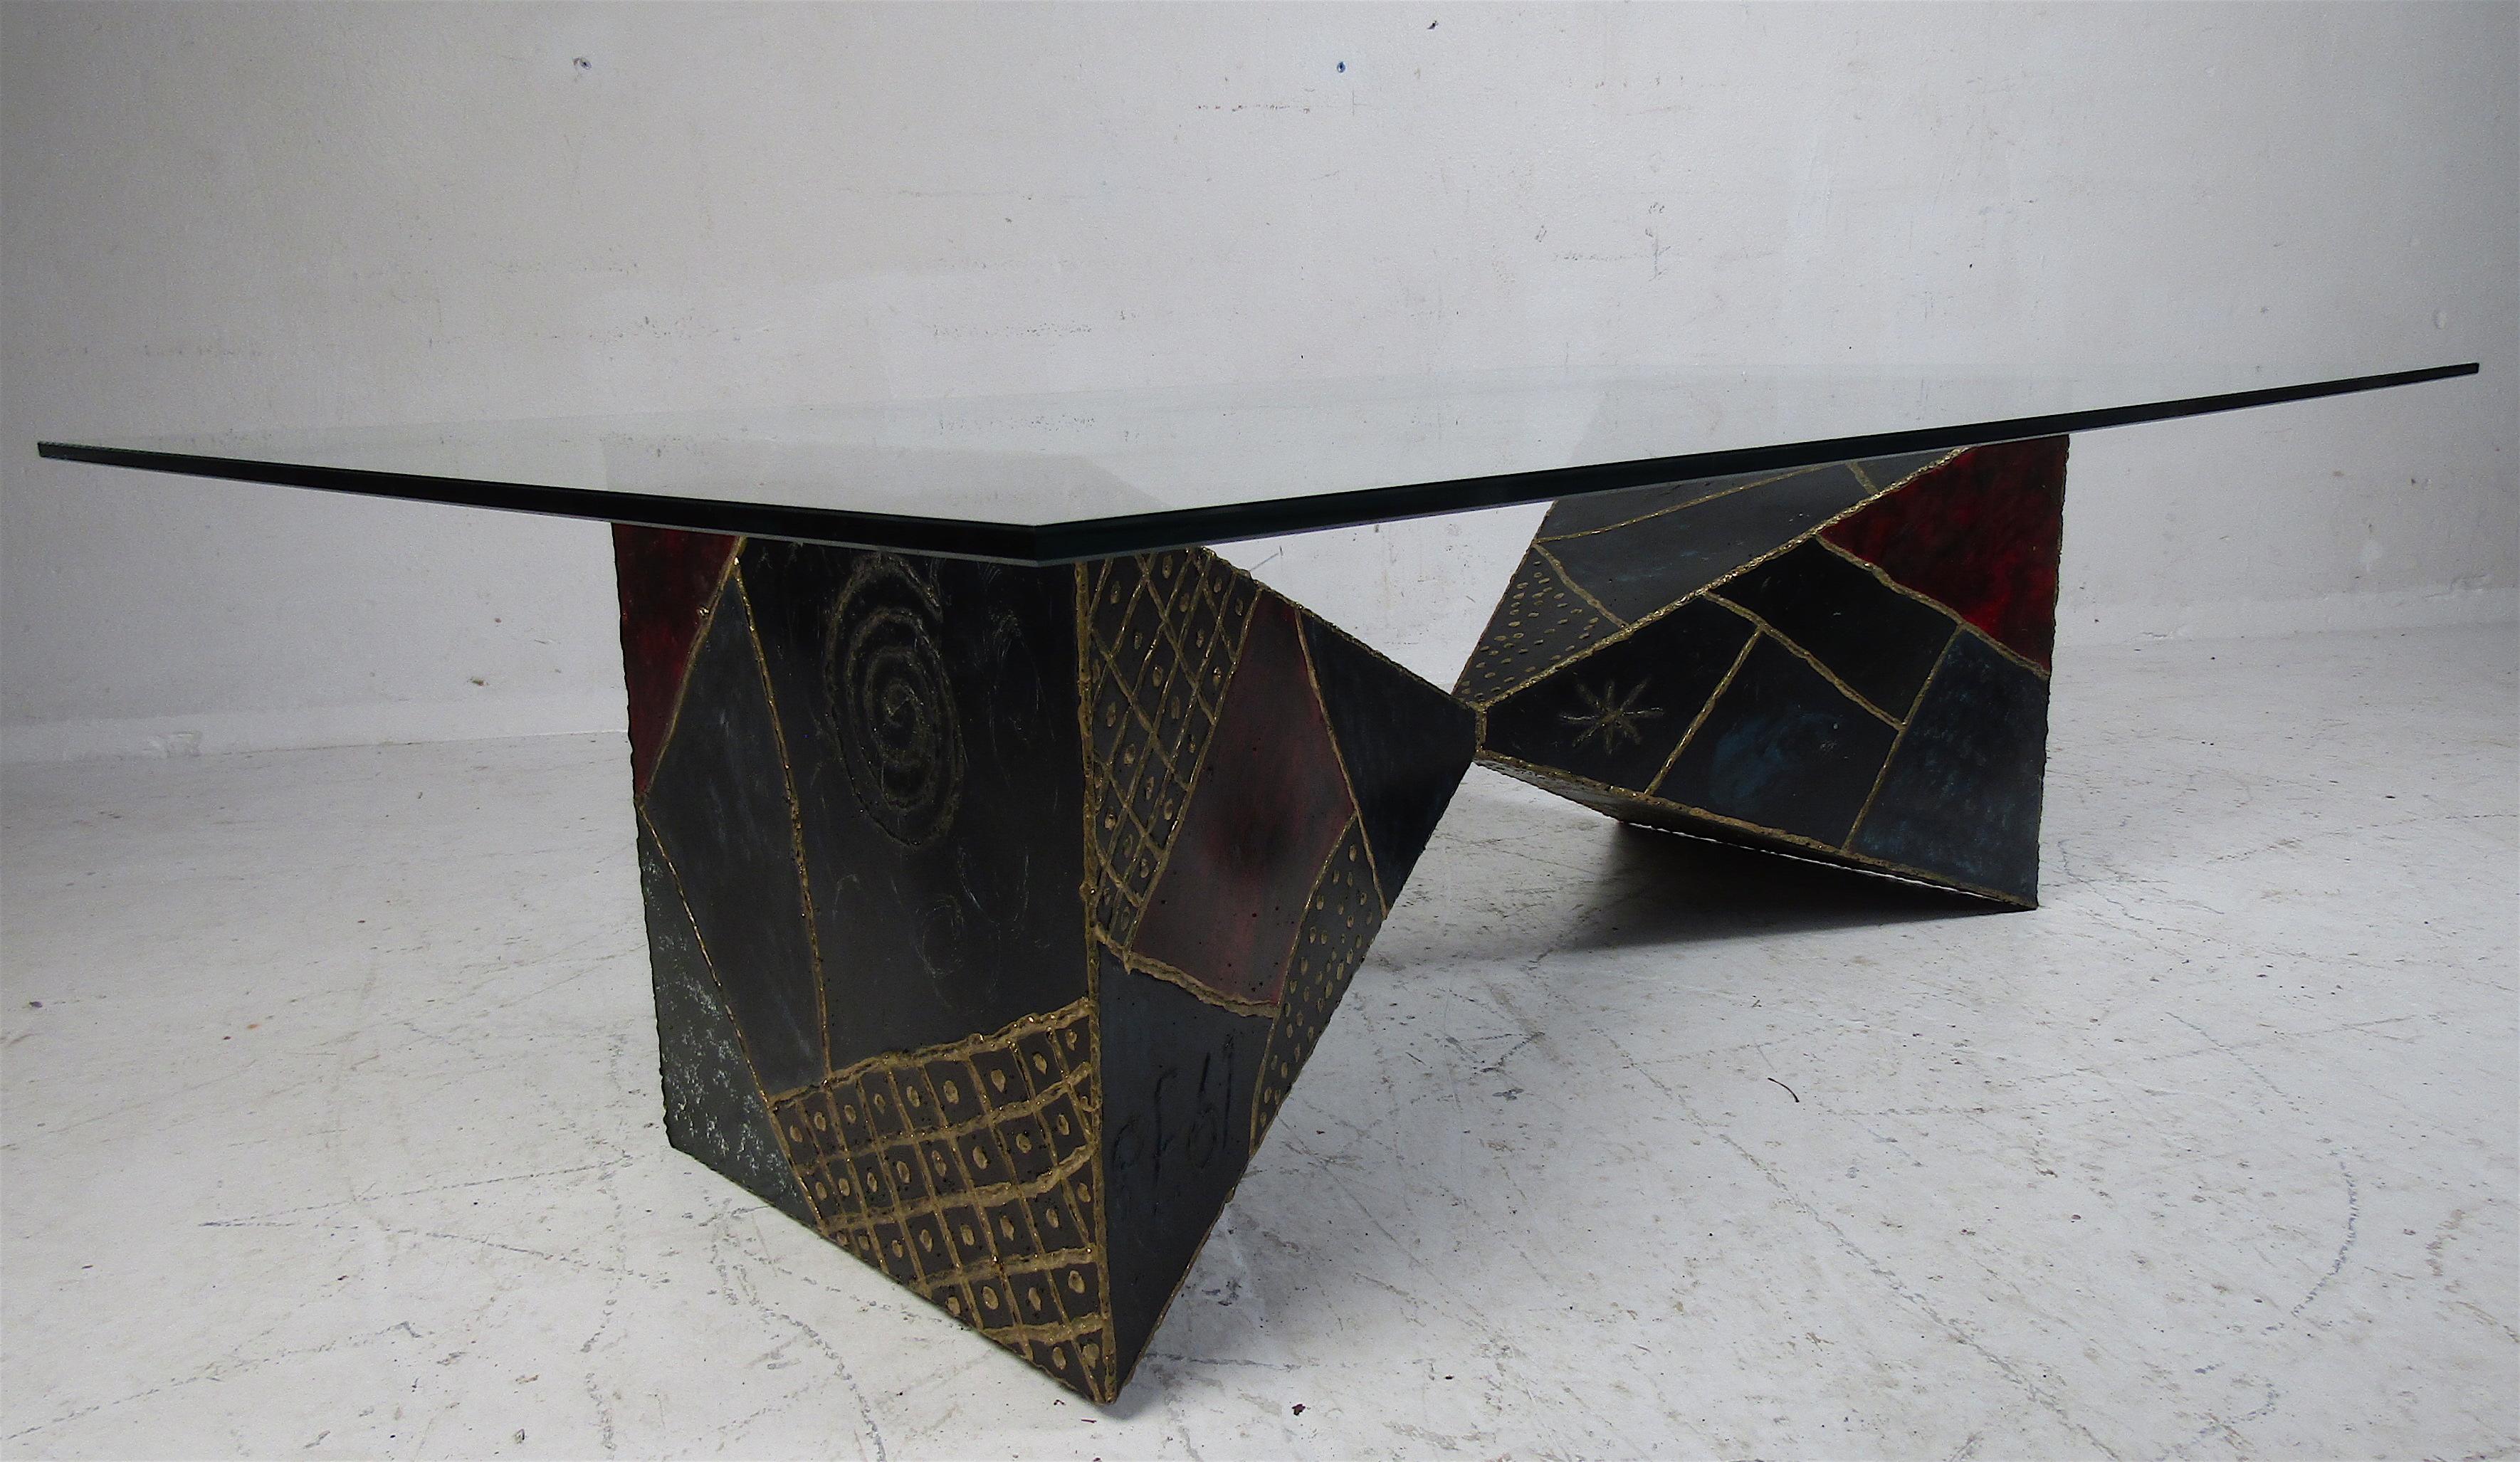 Stunning vintage modern welded metal base coffee table with a rectangular glass top. A sculptural base with two pyramid shaped welded together. The colorful design and thick glass top are sure to complement any modern interior. Paul Evans for